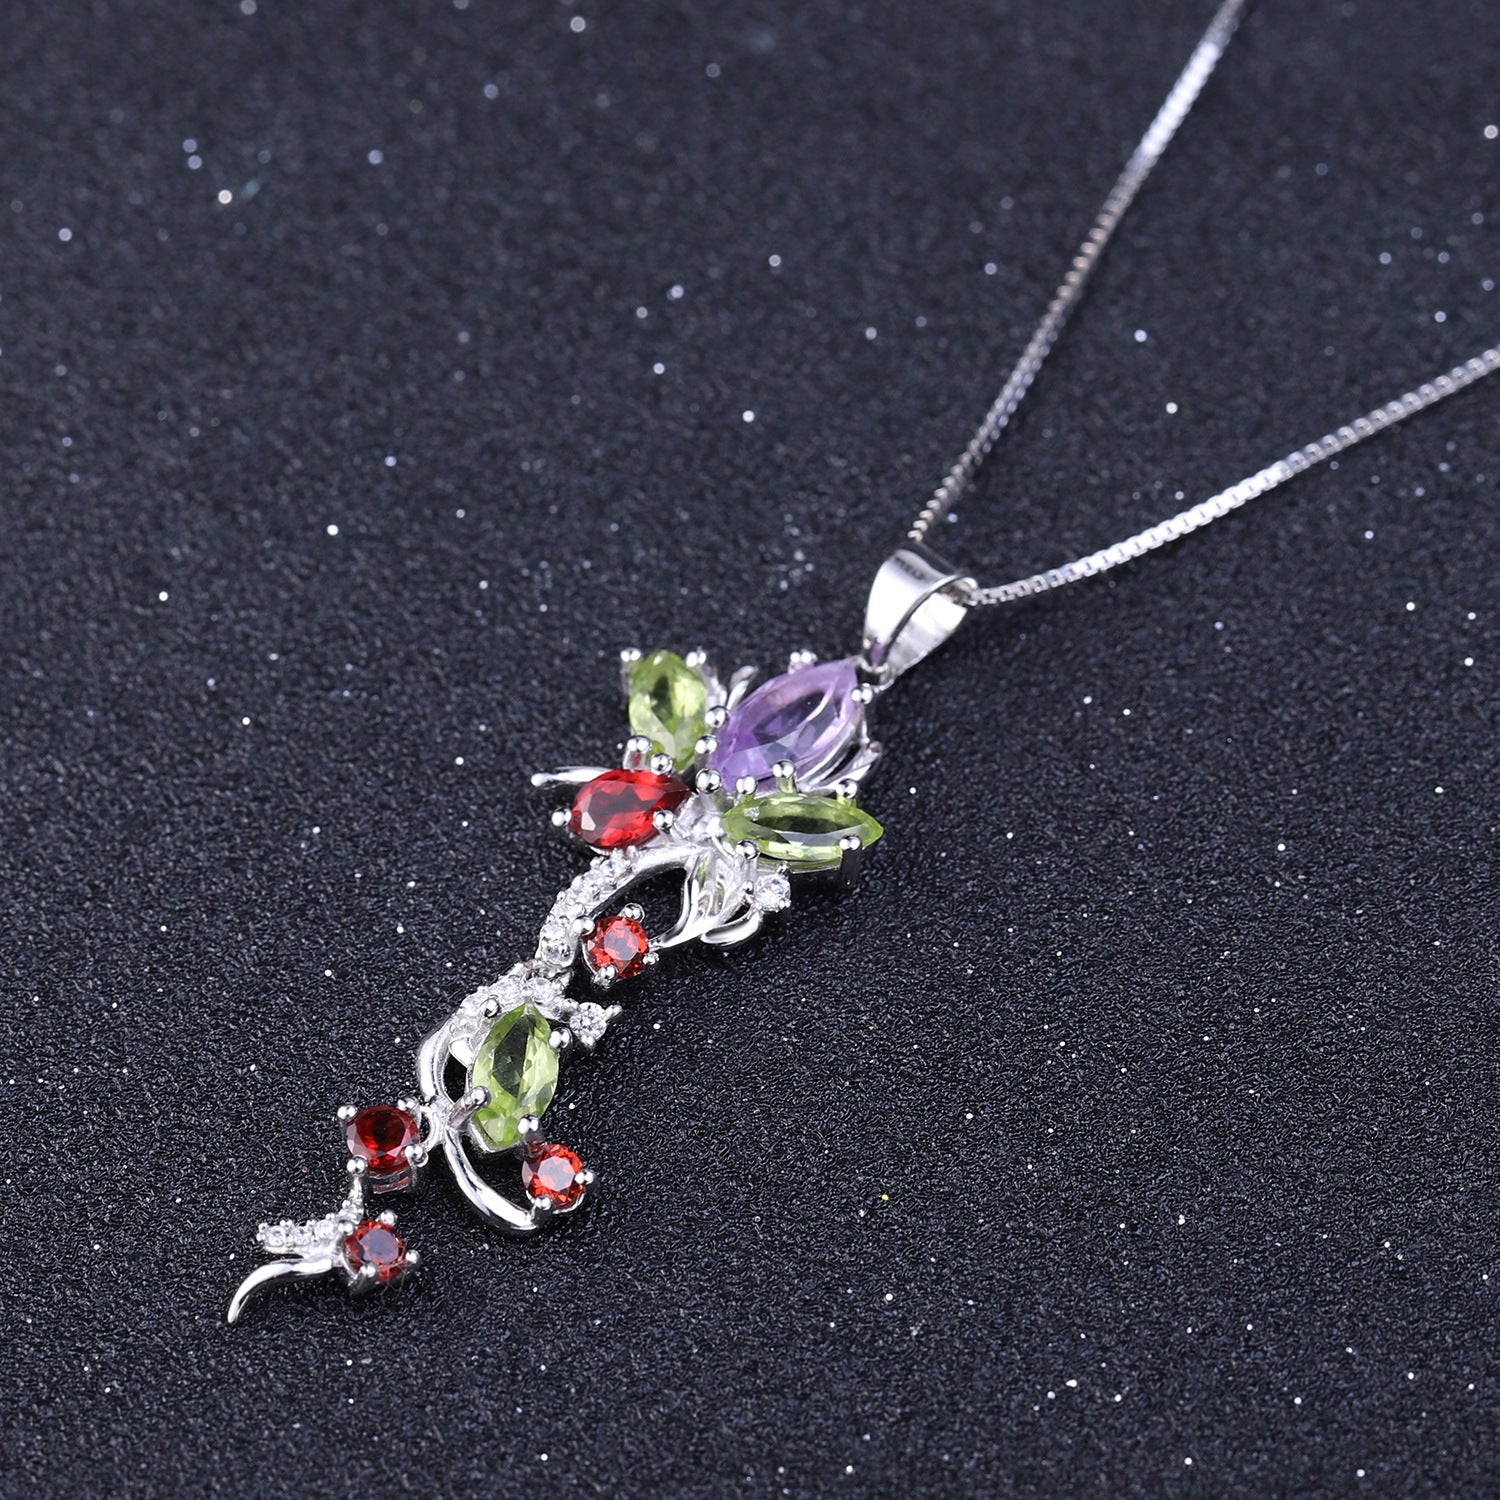 European Original Jewelry Design Inlaid Colourful Gemstone Sterling Silver Necklace for Women